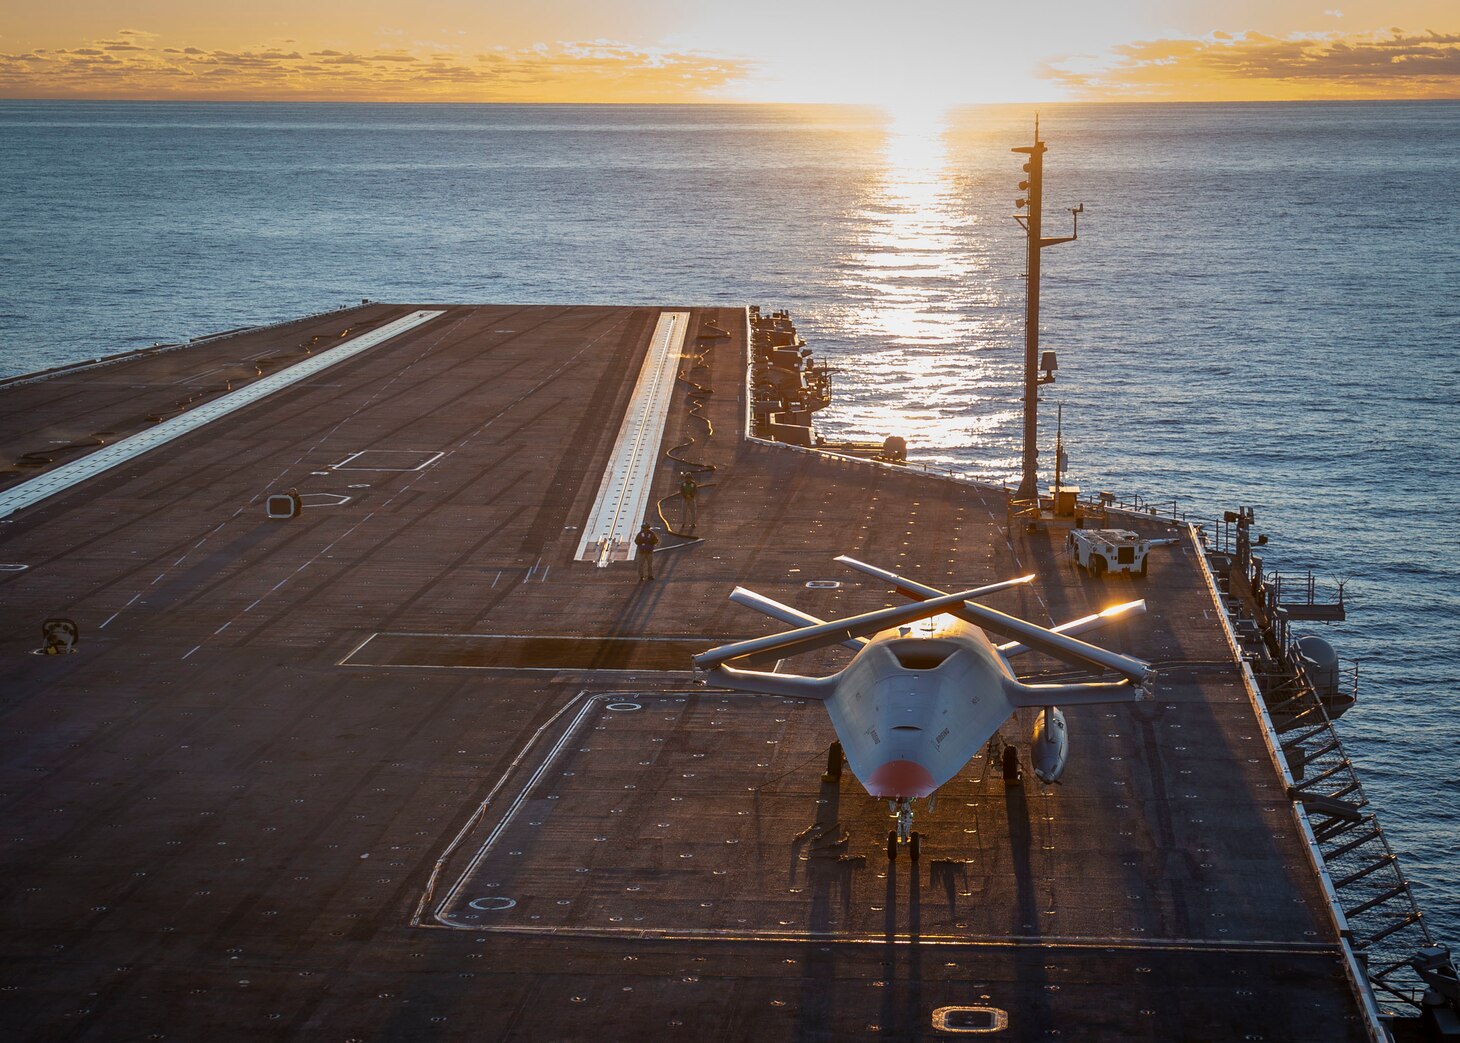 A Boeing unmanned MQ-25 aircraft sits on the flight deck aboard the aircraft carrier USS George H.W. Bush (CVN 77).